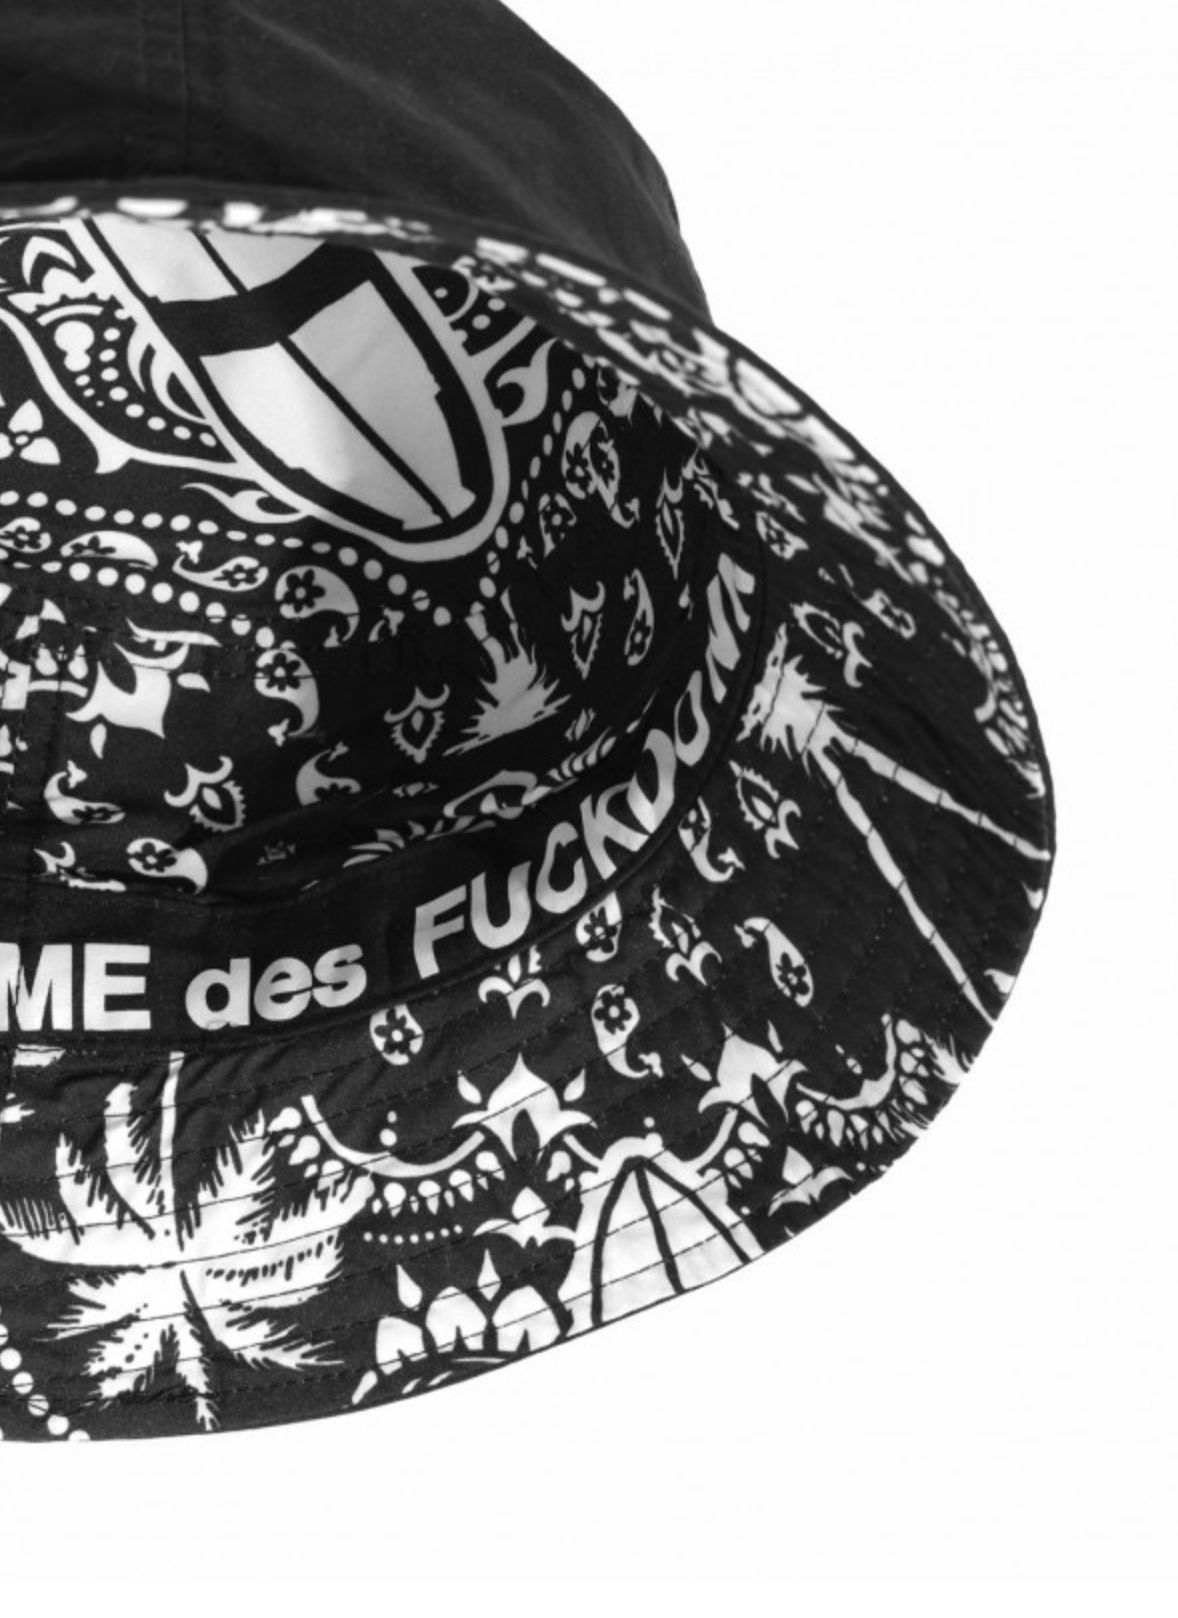 Comme Des Fuckdown Chic Reversible Cap with Bold Logo